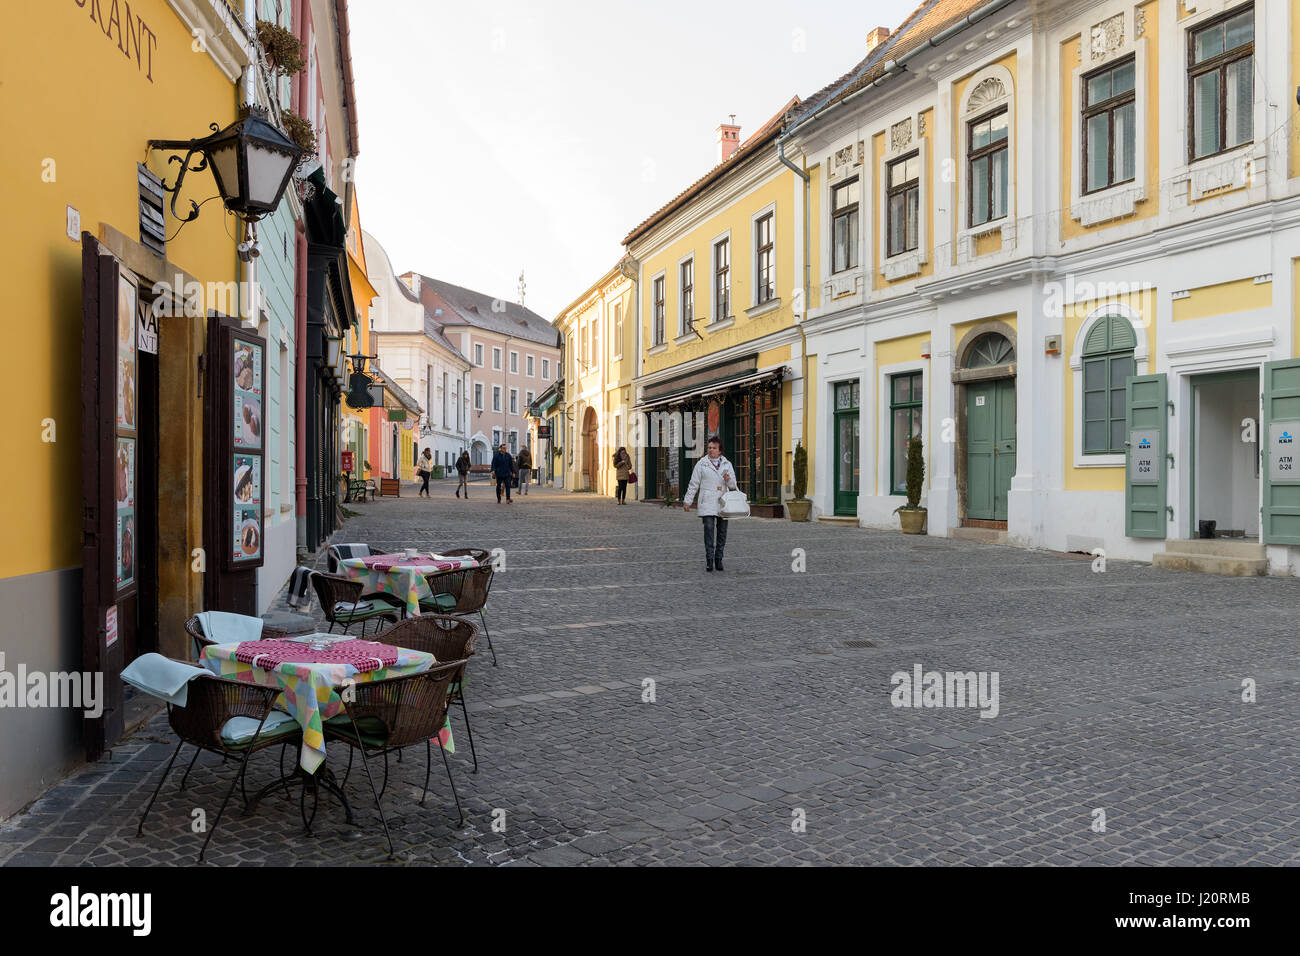 People and traditional buildings at the city center of Szentendre, Hungary - popular tourist village Stock Photo